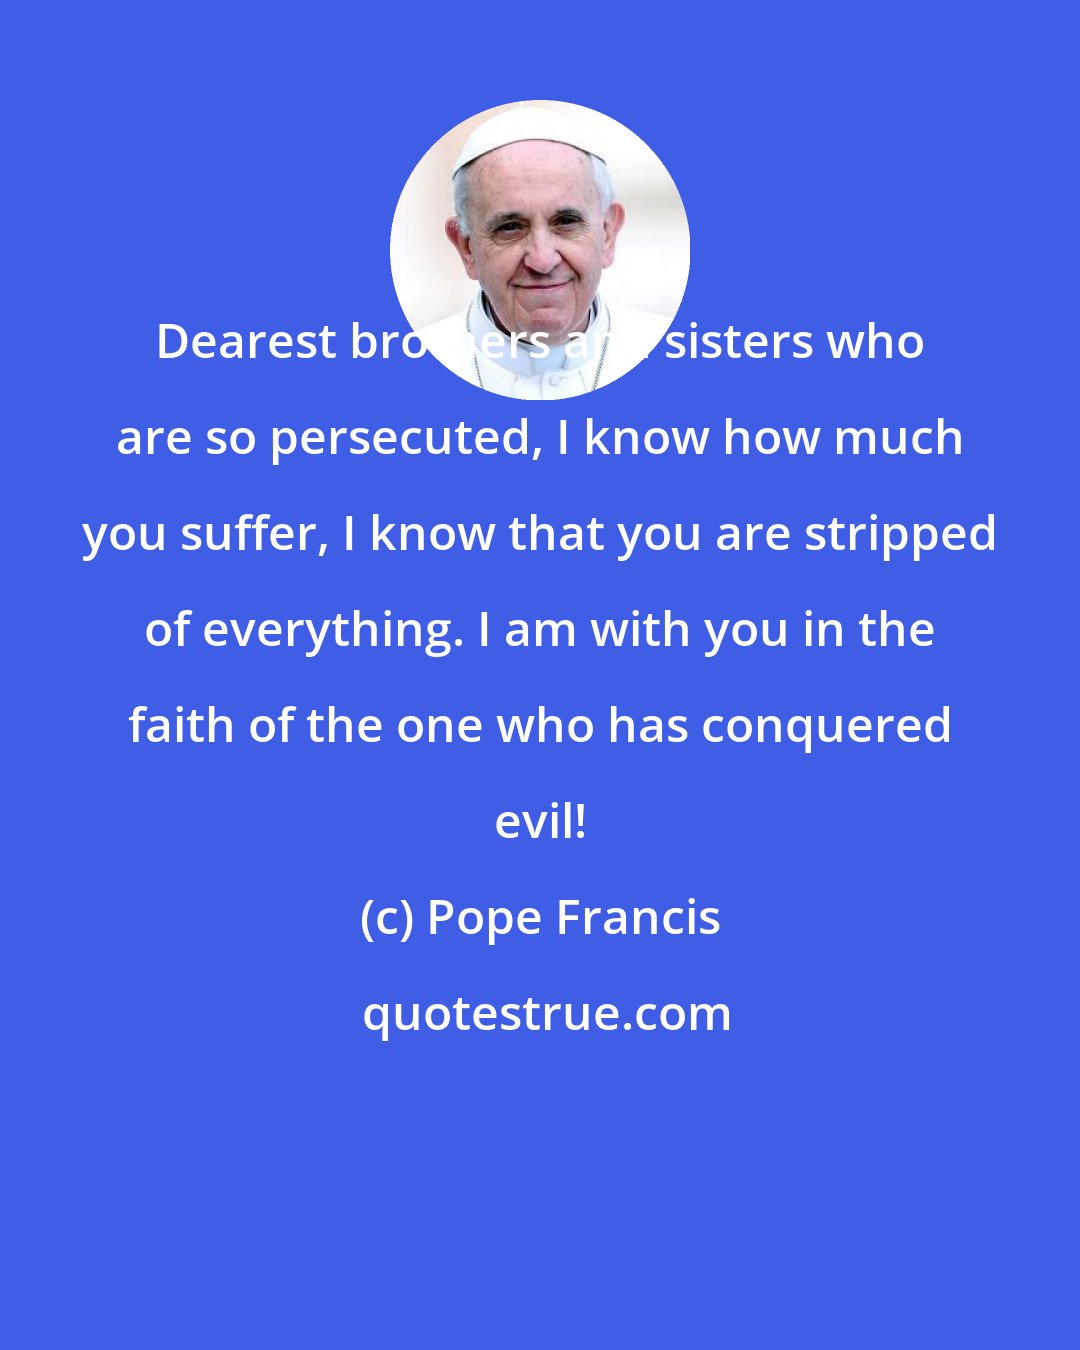 Pope Francis: Dearest brothers and sisters who are so persecuted, I know how much you suffer, I know that you are stripped of everything. I am with you in the faith of the one who has conquered evil!